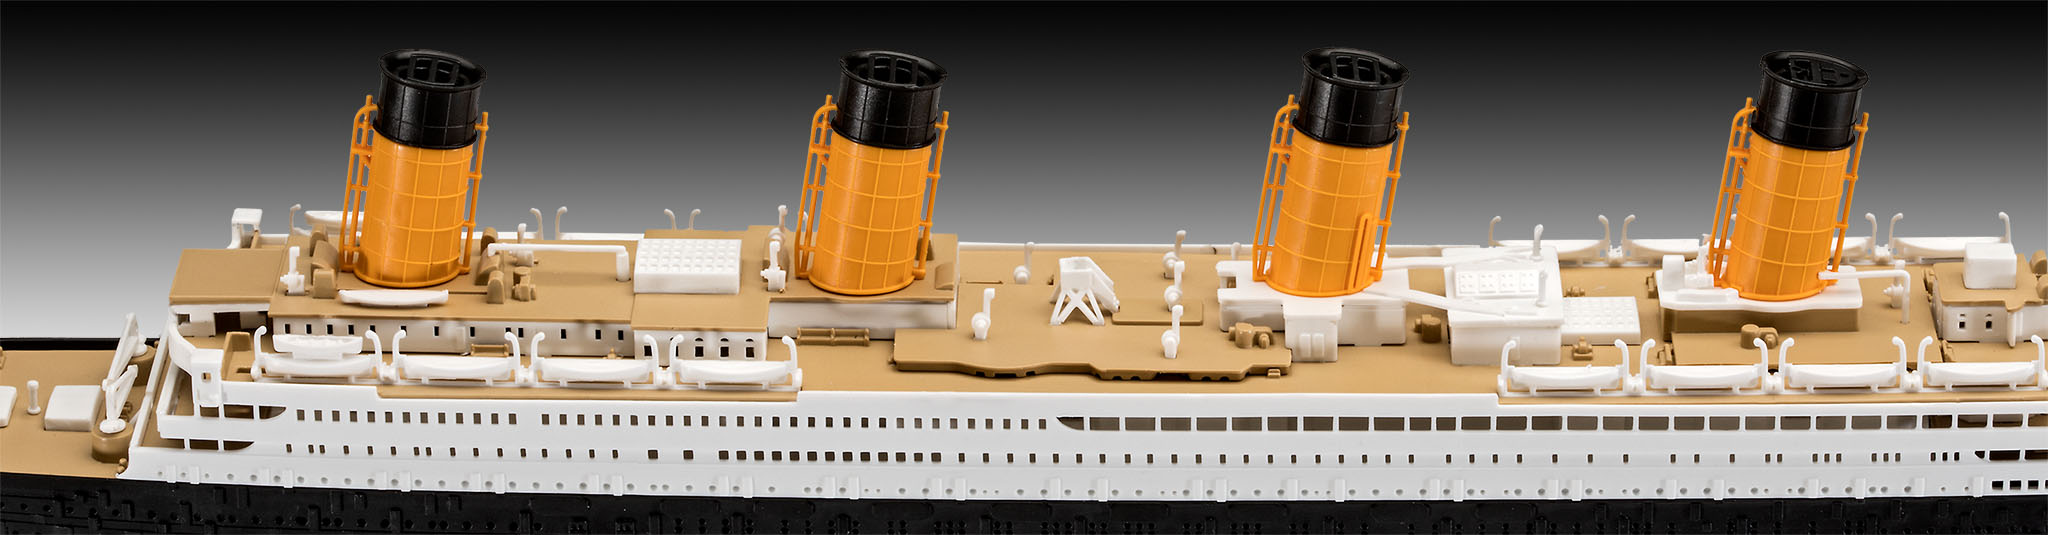 Revell 05599 RMS TITANIC 'easy-click systeem'